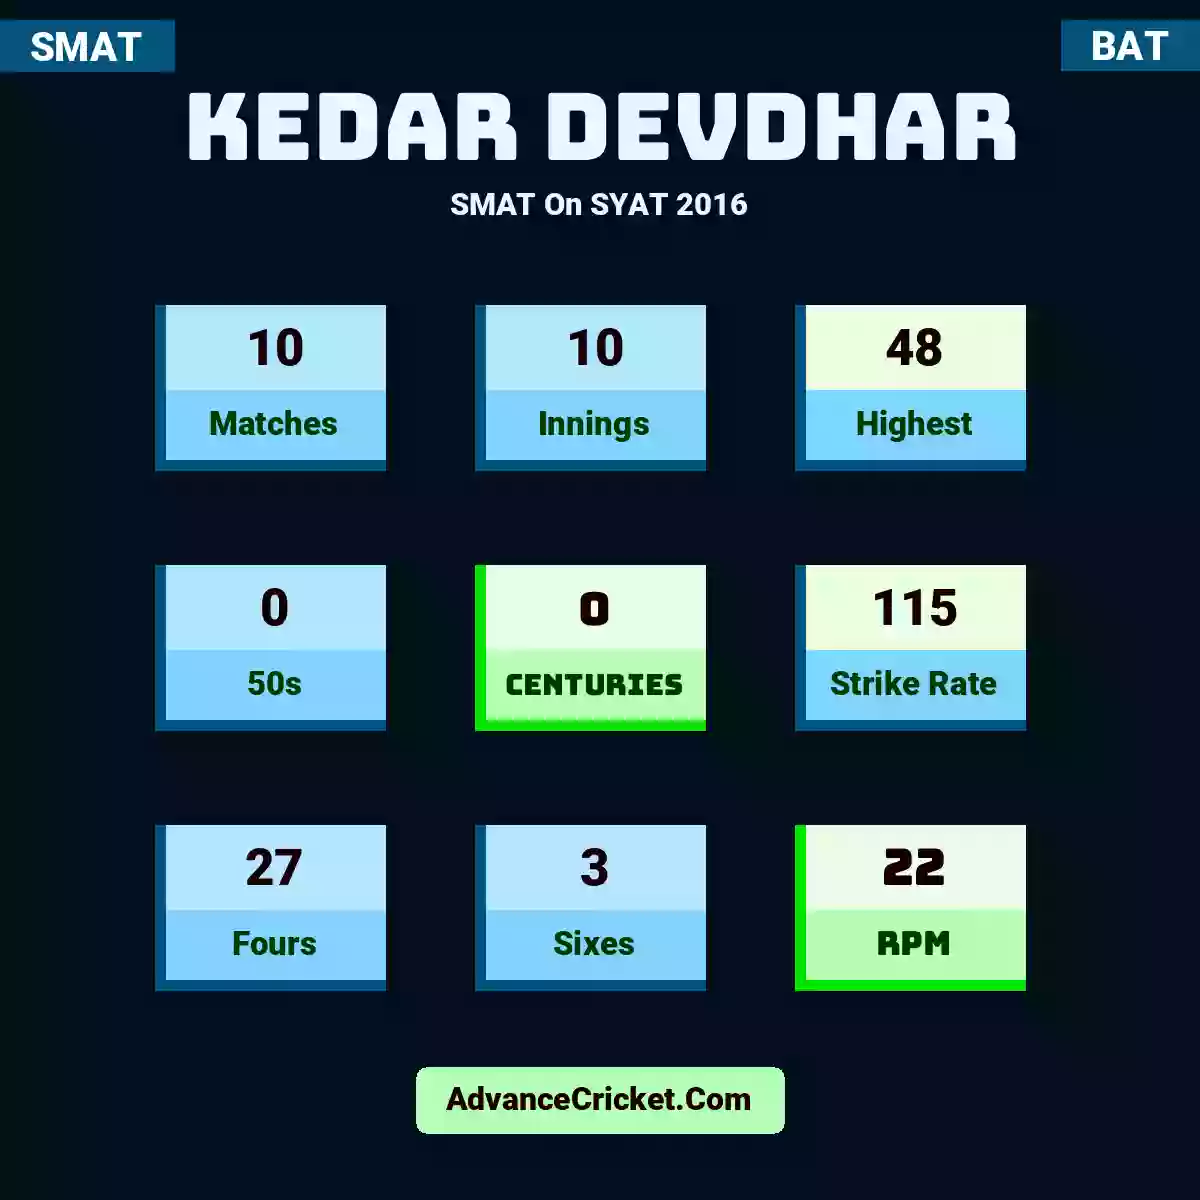 Kedar Devdhar SMAT  On SYAT 2016, Kedar Devdhar played 10 matches, scored 48 runs as highest, 0 half-centuries, and 0 centuries, with a strike rate of 115. K.Devdhar hit 27 fours and 3 sixes, with an RPM of 22.